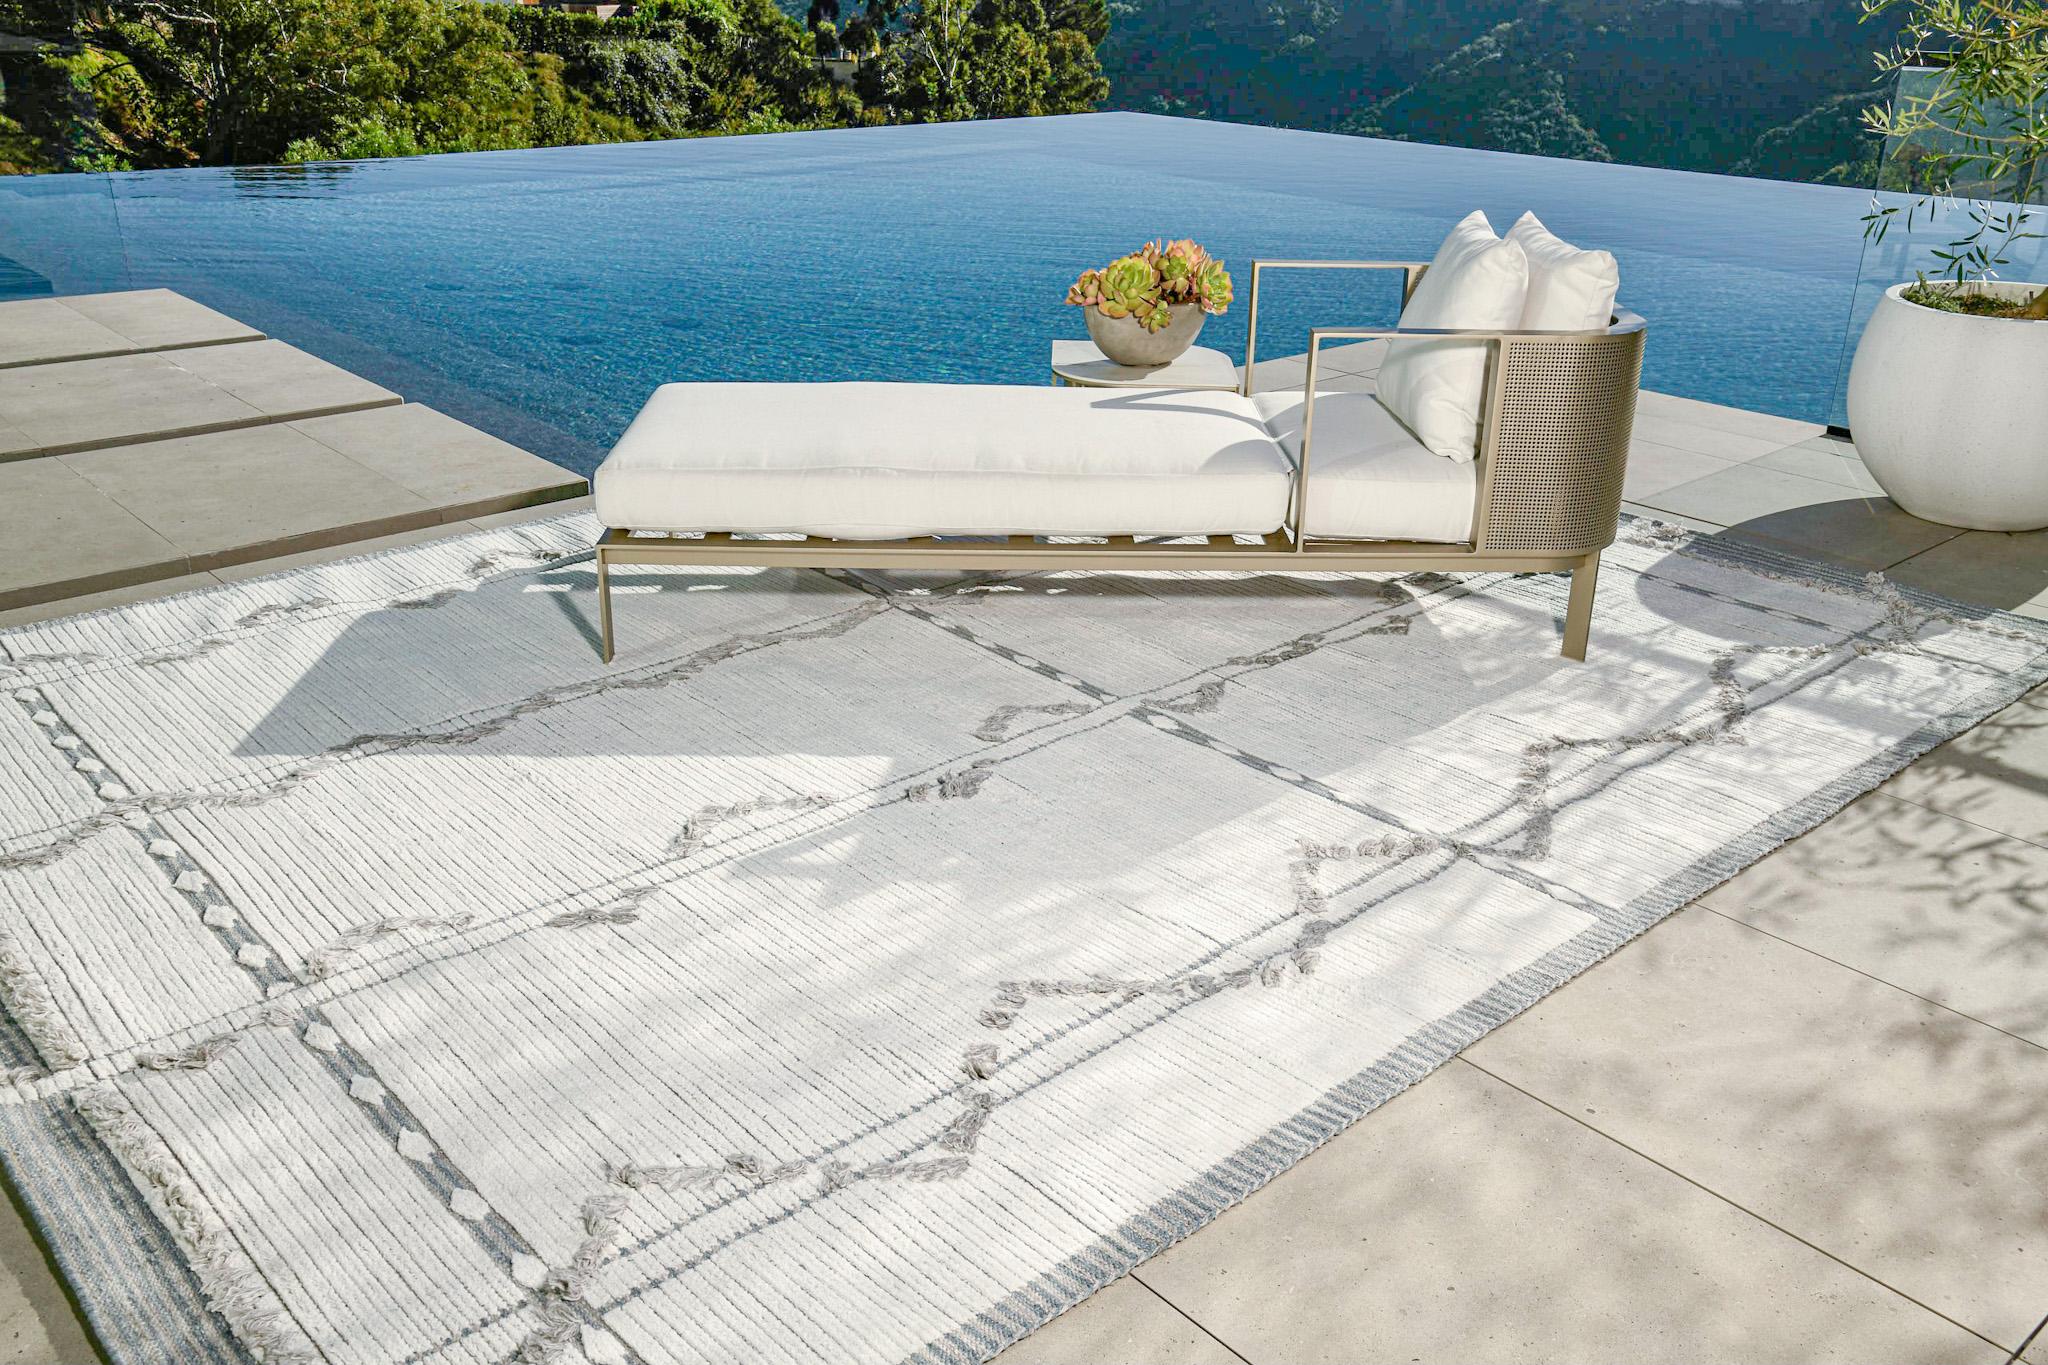 Enjoy the fresh air with Nasim, rugs that work indoors and out.

Rug Number
31449
Size
9' 1